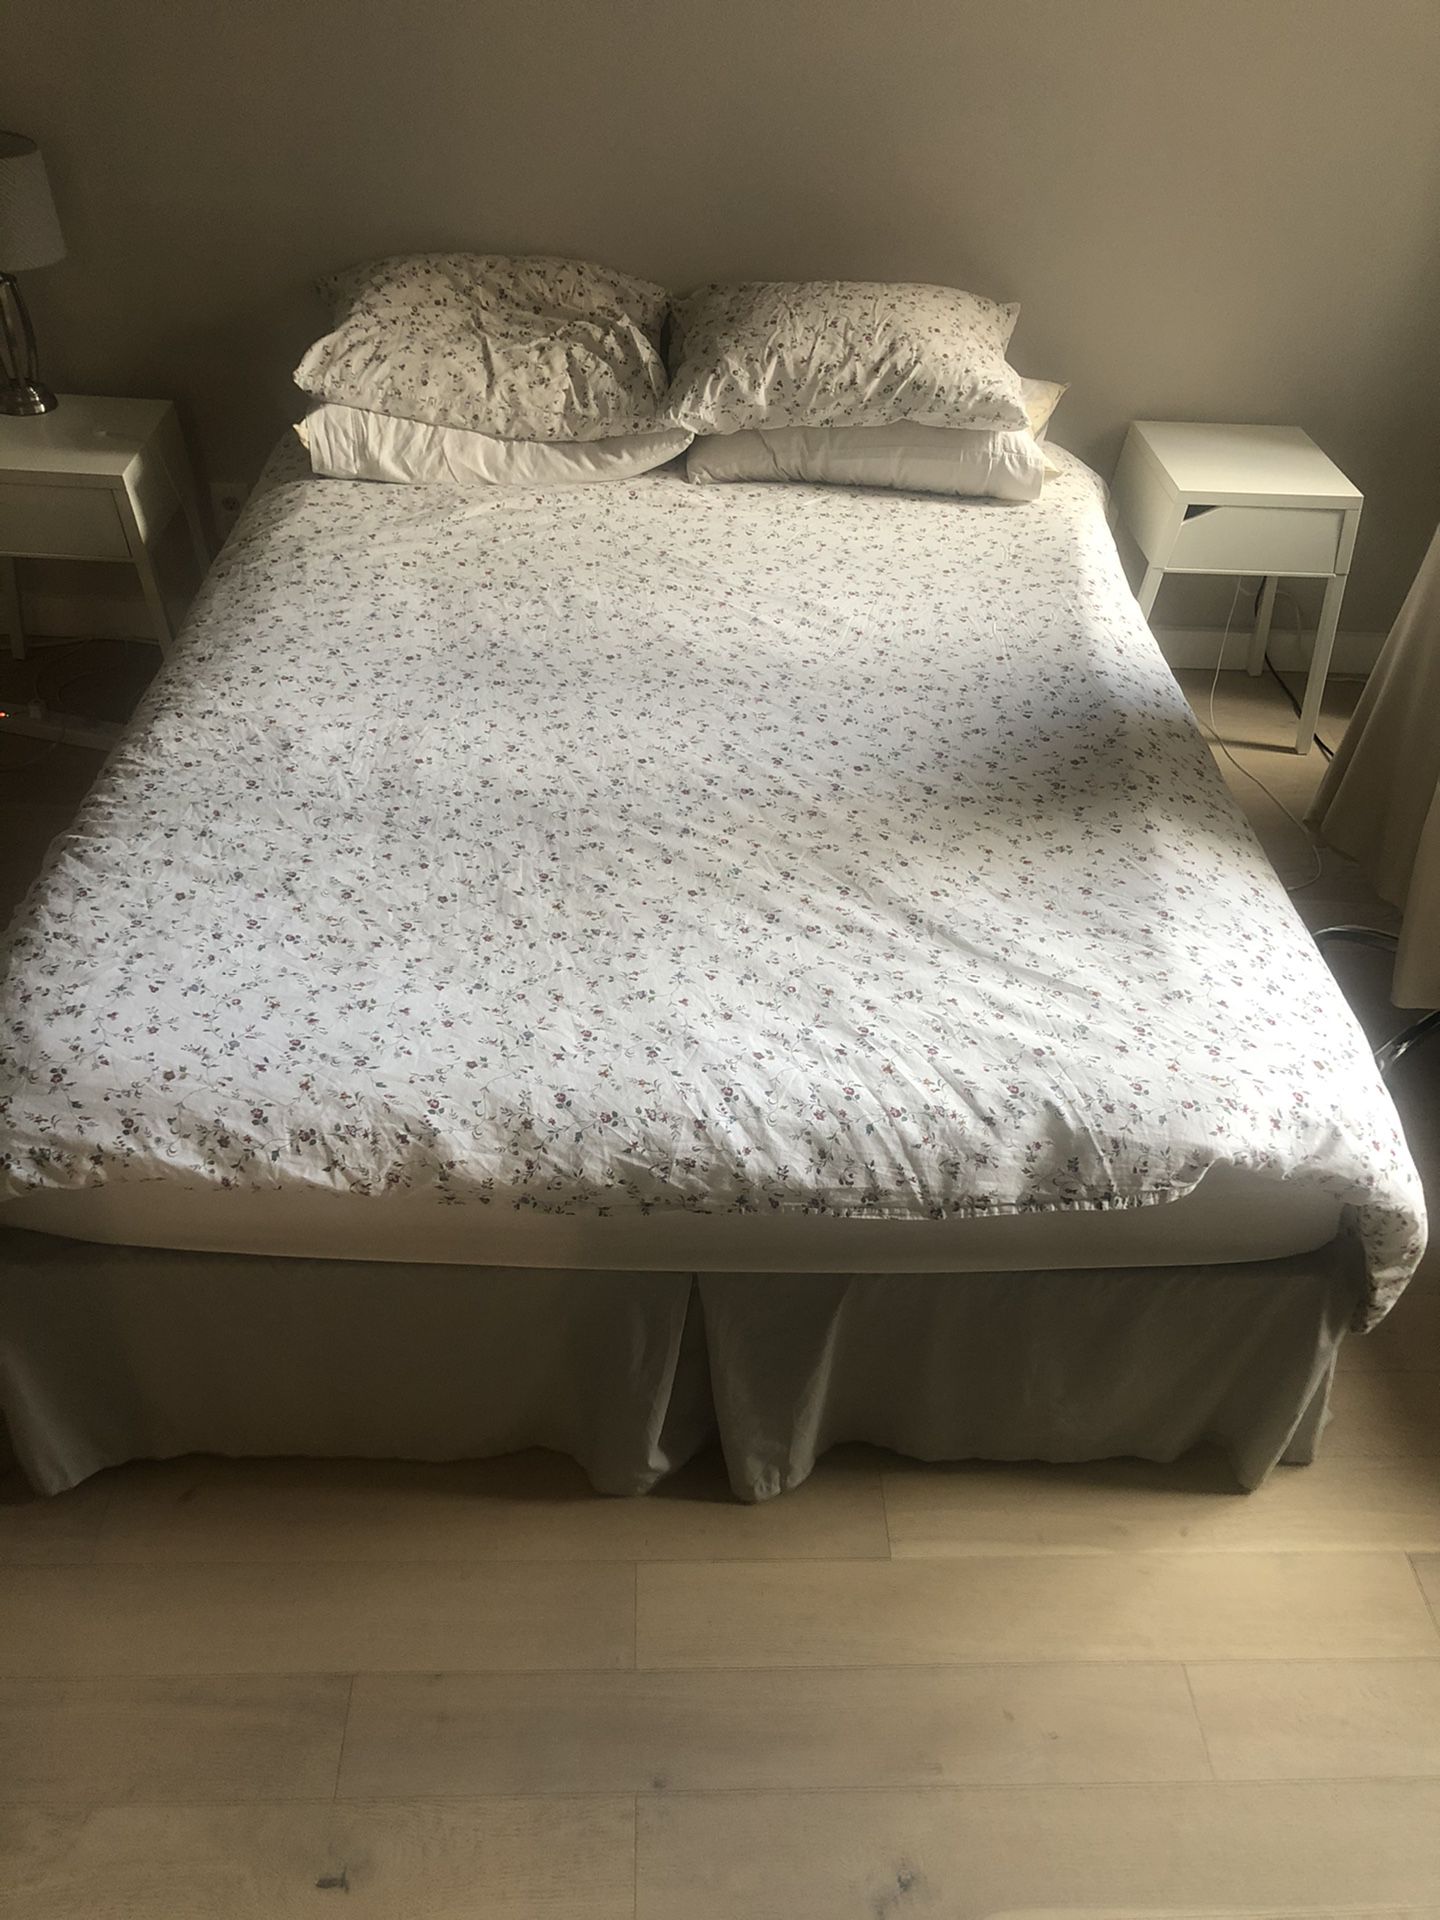 Bed with matress and pillows (only cash or Venmo)